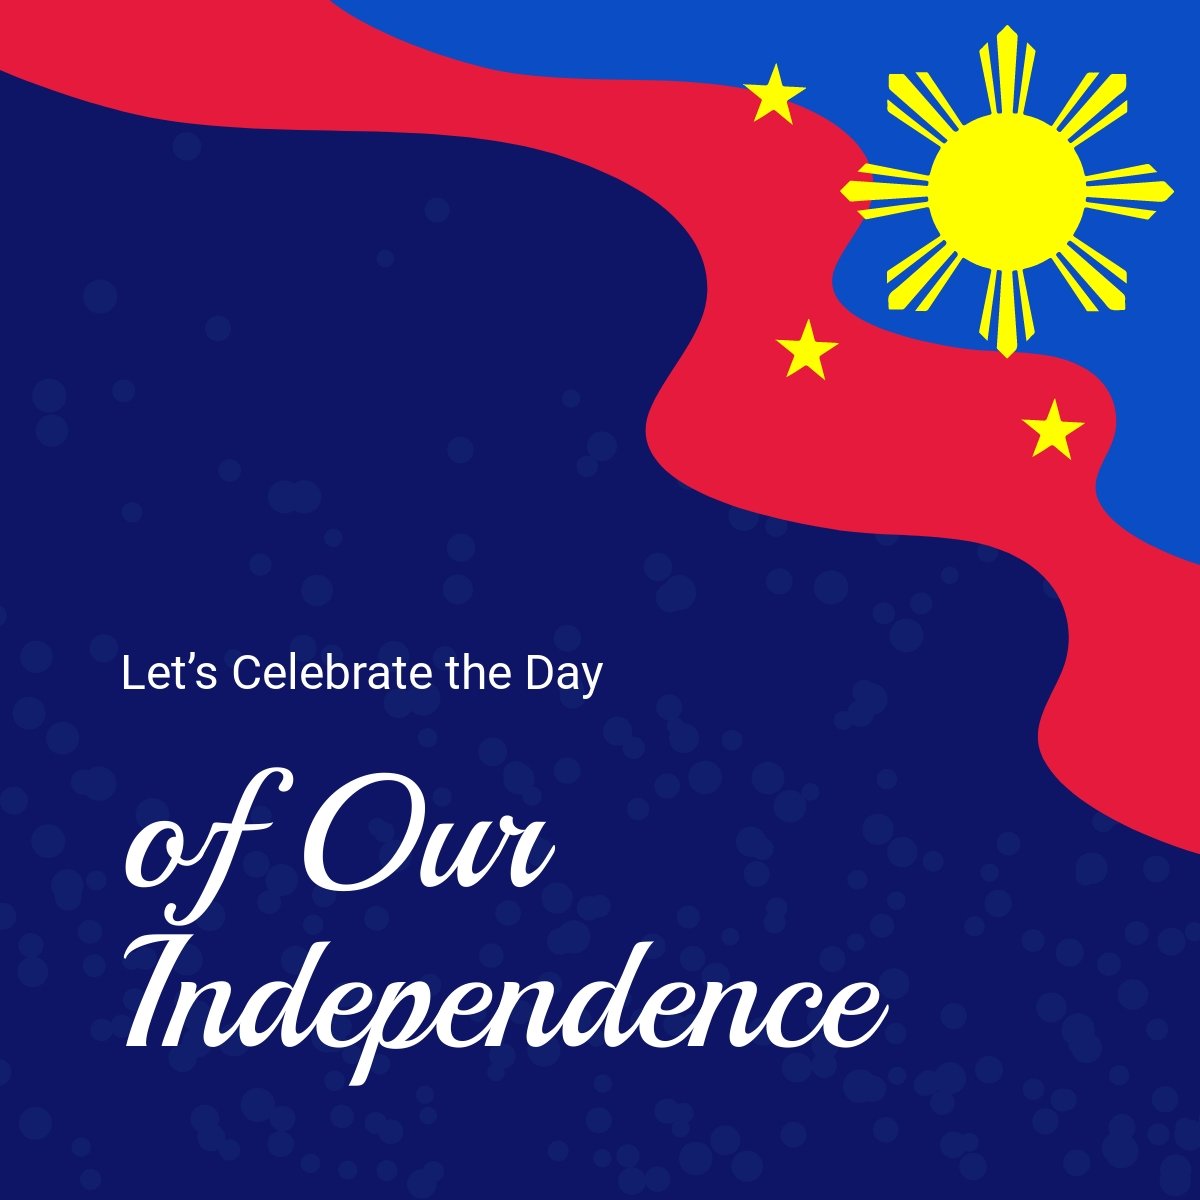 Philippines Independence Day Celebration Linkedin Post Template